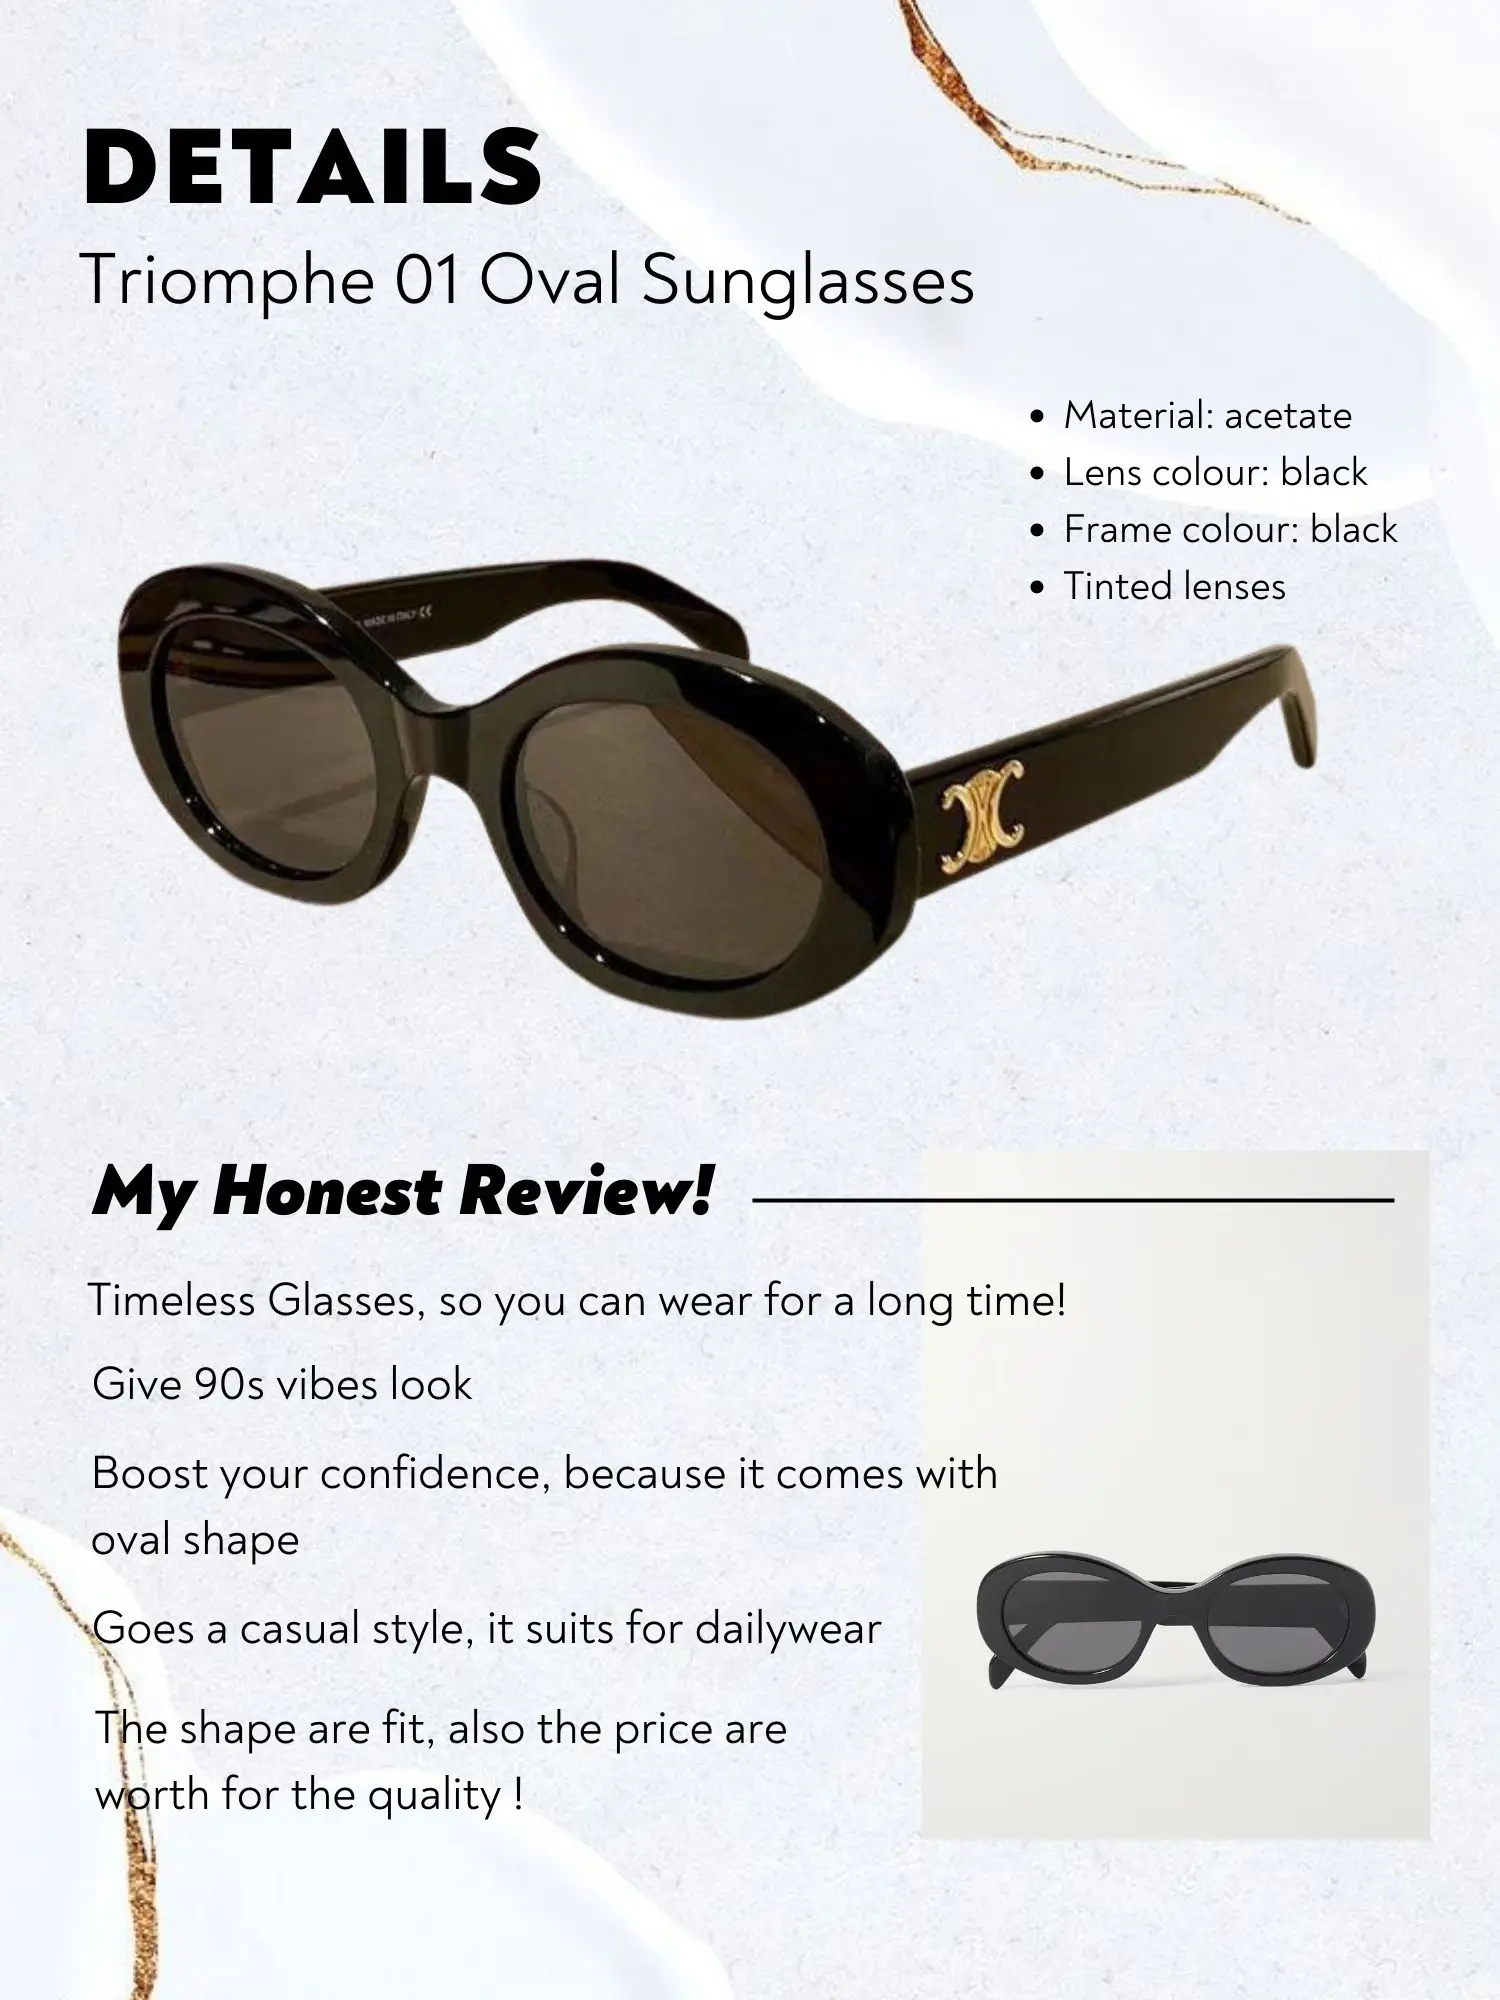 Celine Sunglasses Review: Triomphe, Audrey, stockists, and more